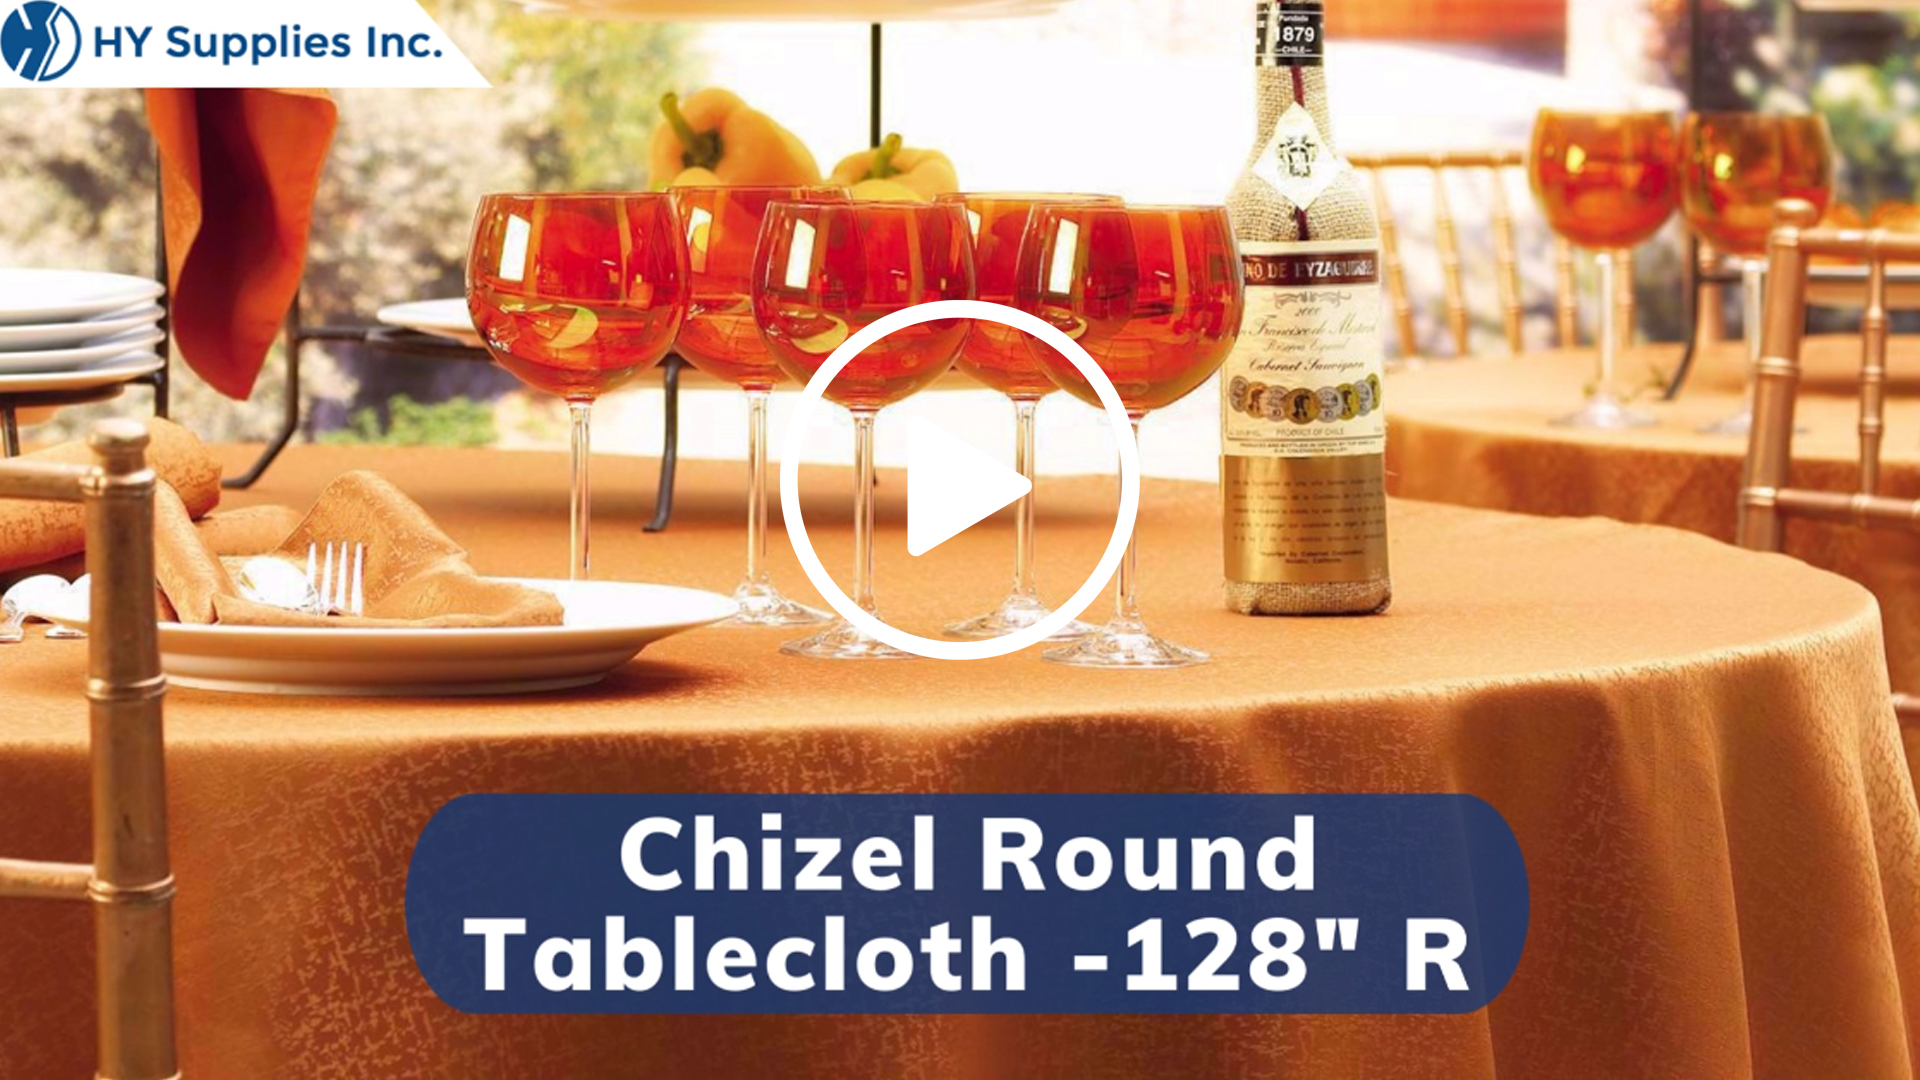 Chizel Round Tablecloth - 128" R